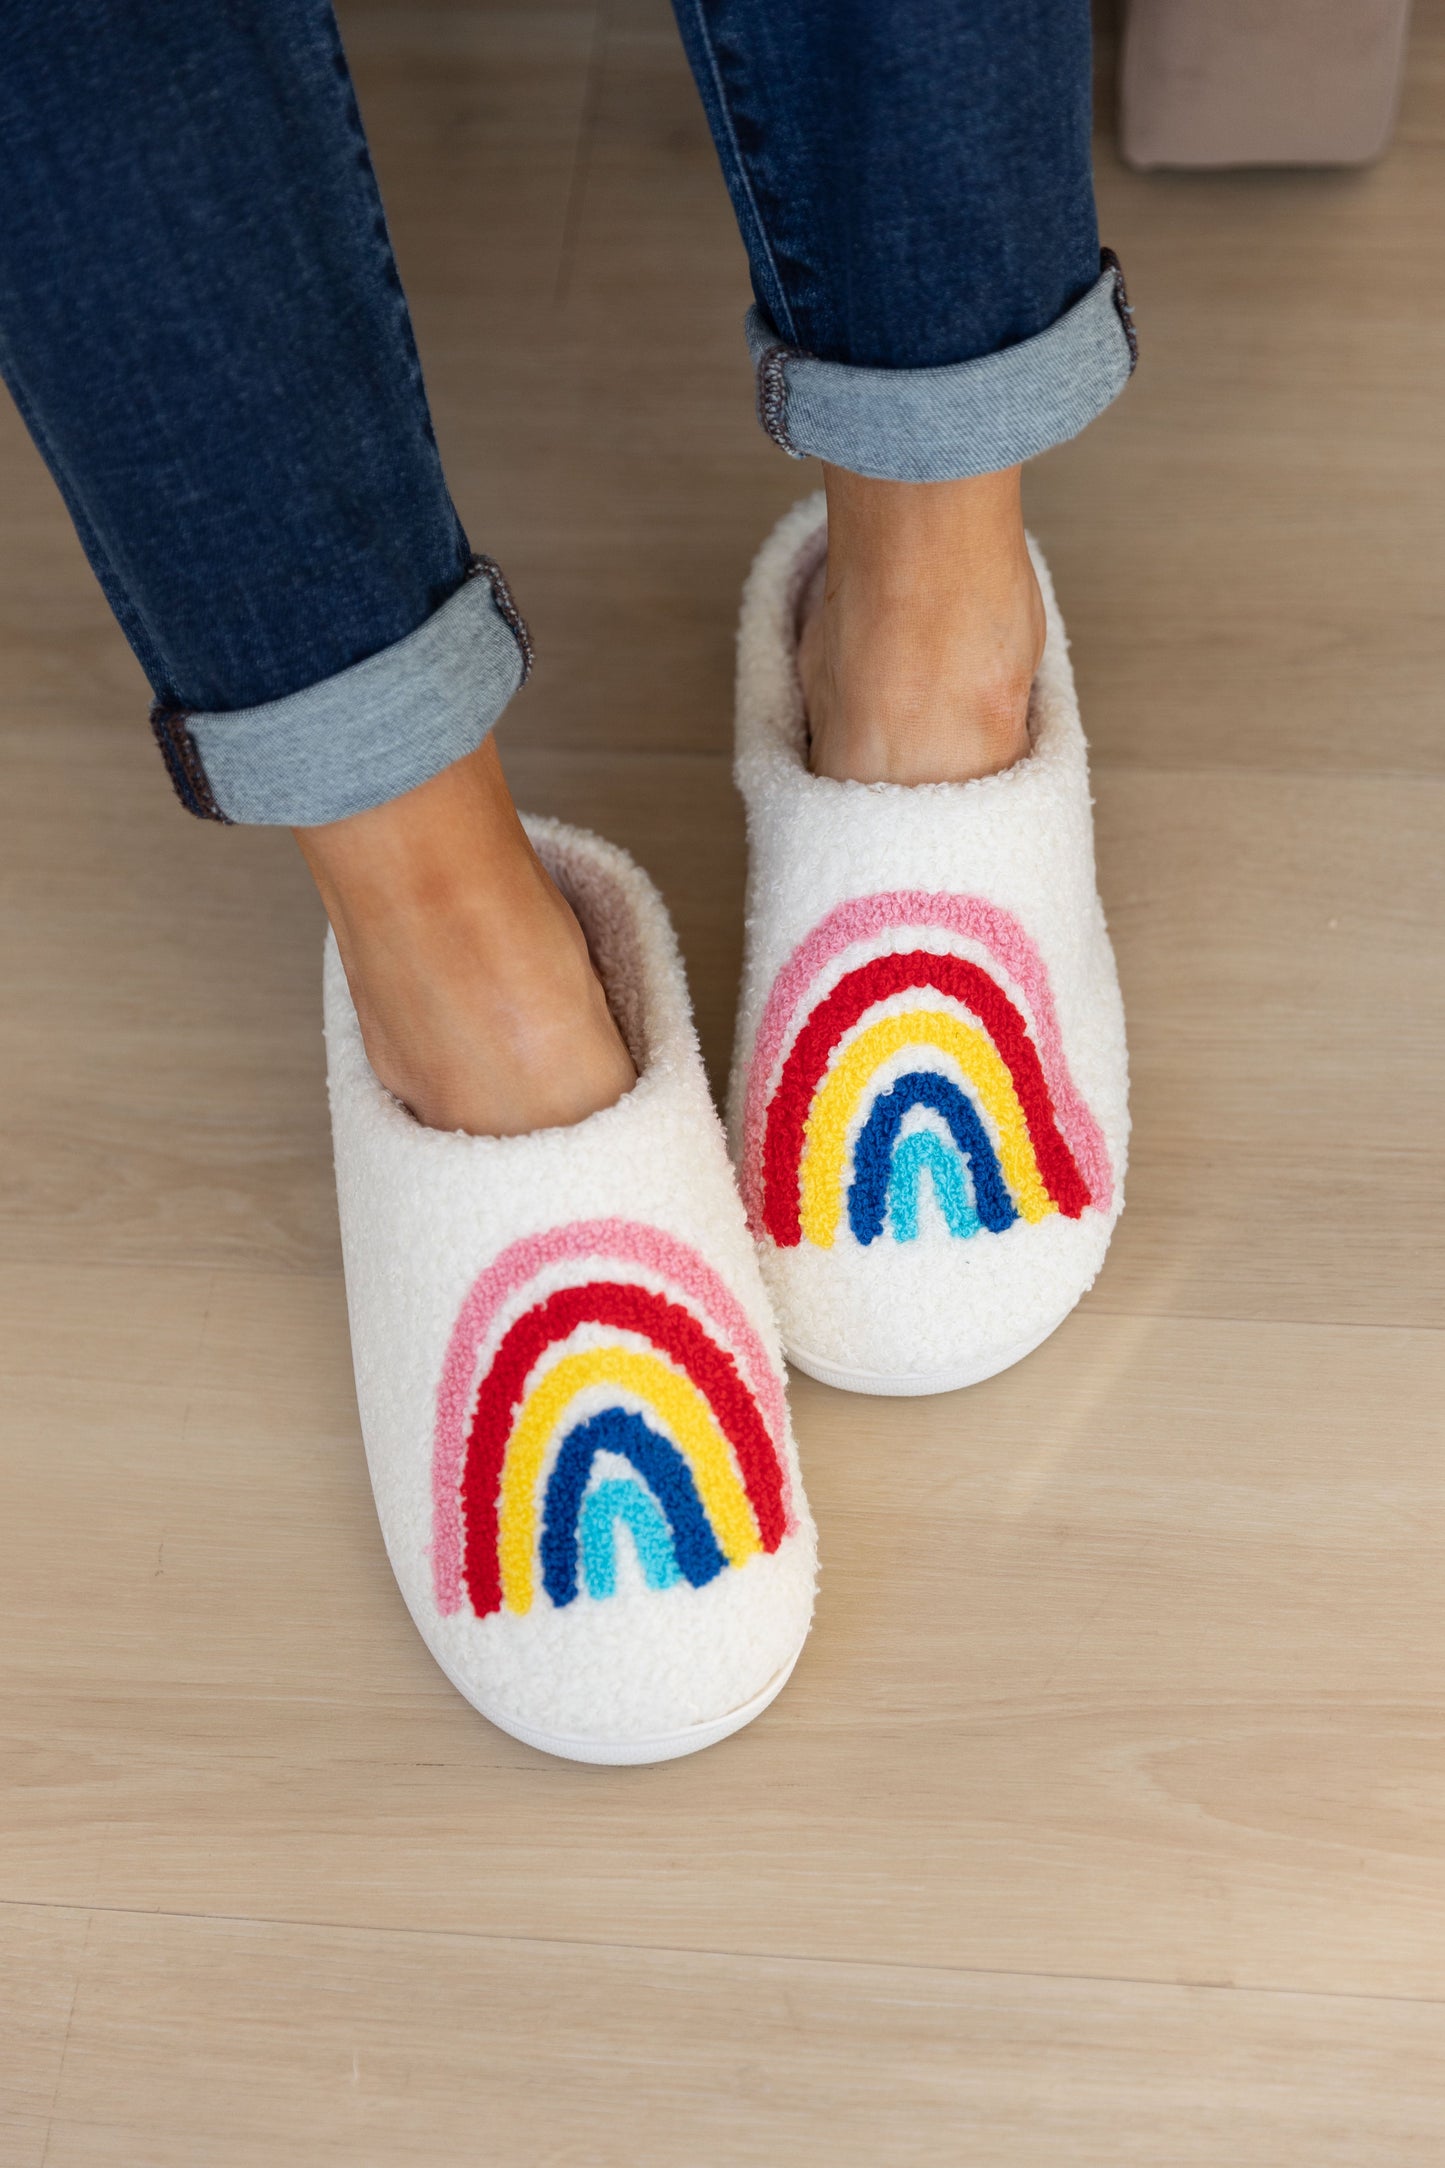 This Promise Slipper Shoes